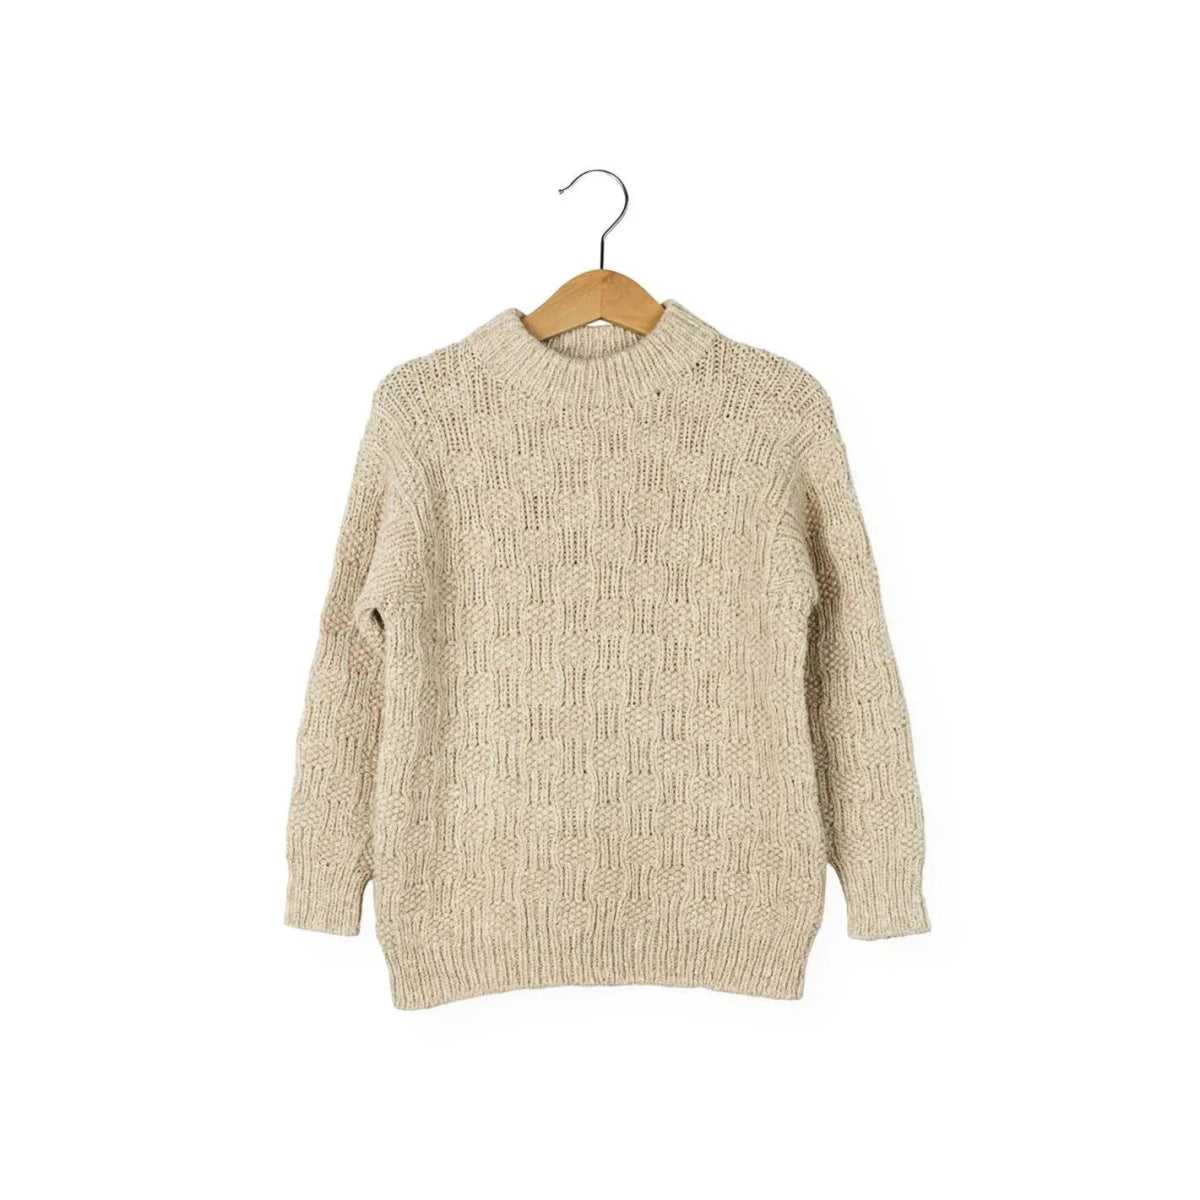 Isager Relief for Kids Sweater - Coming Soon - Isager - The Little Yarn Store